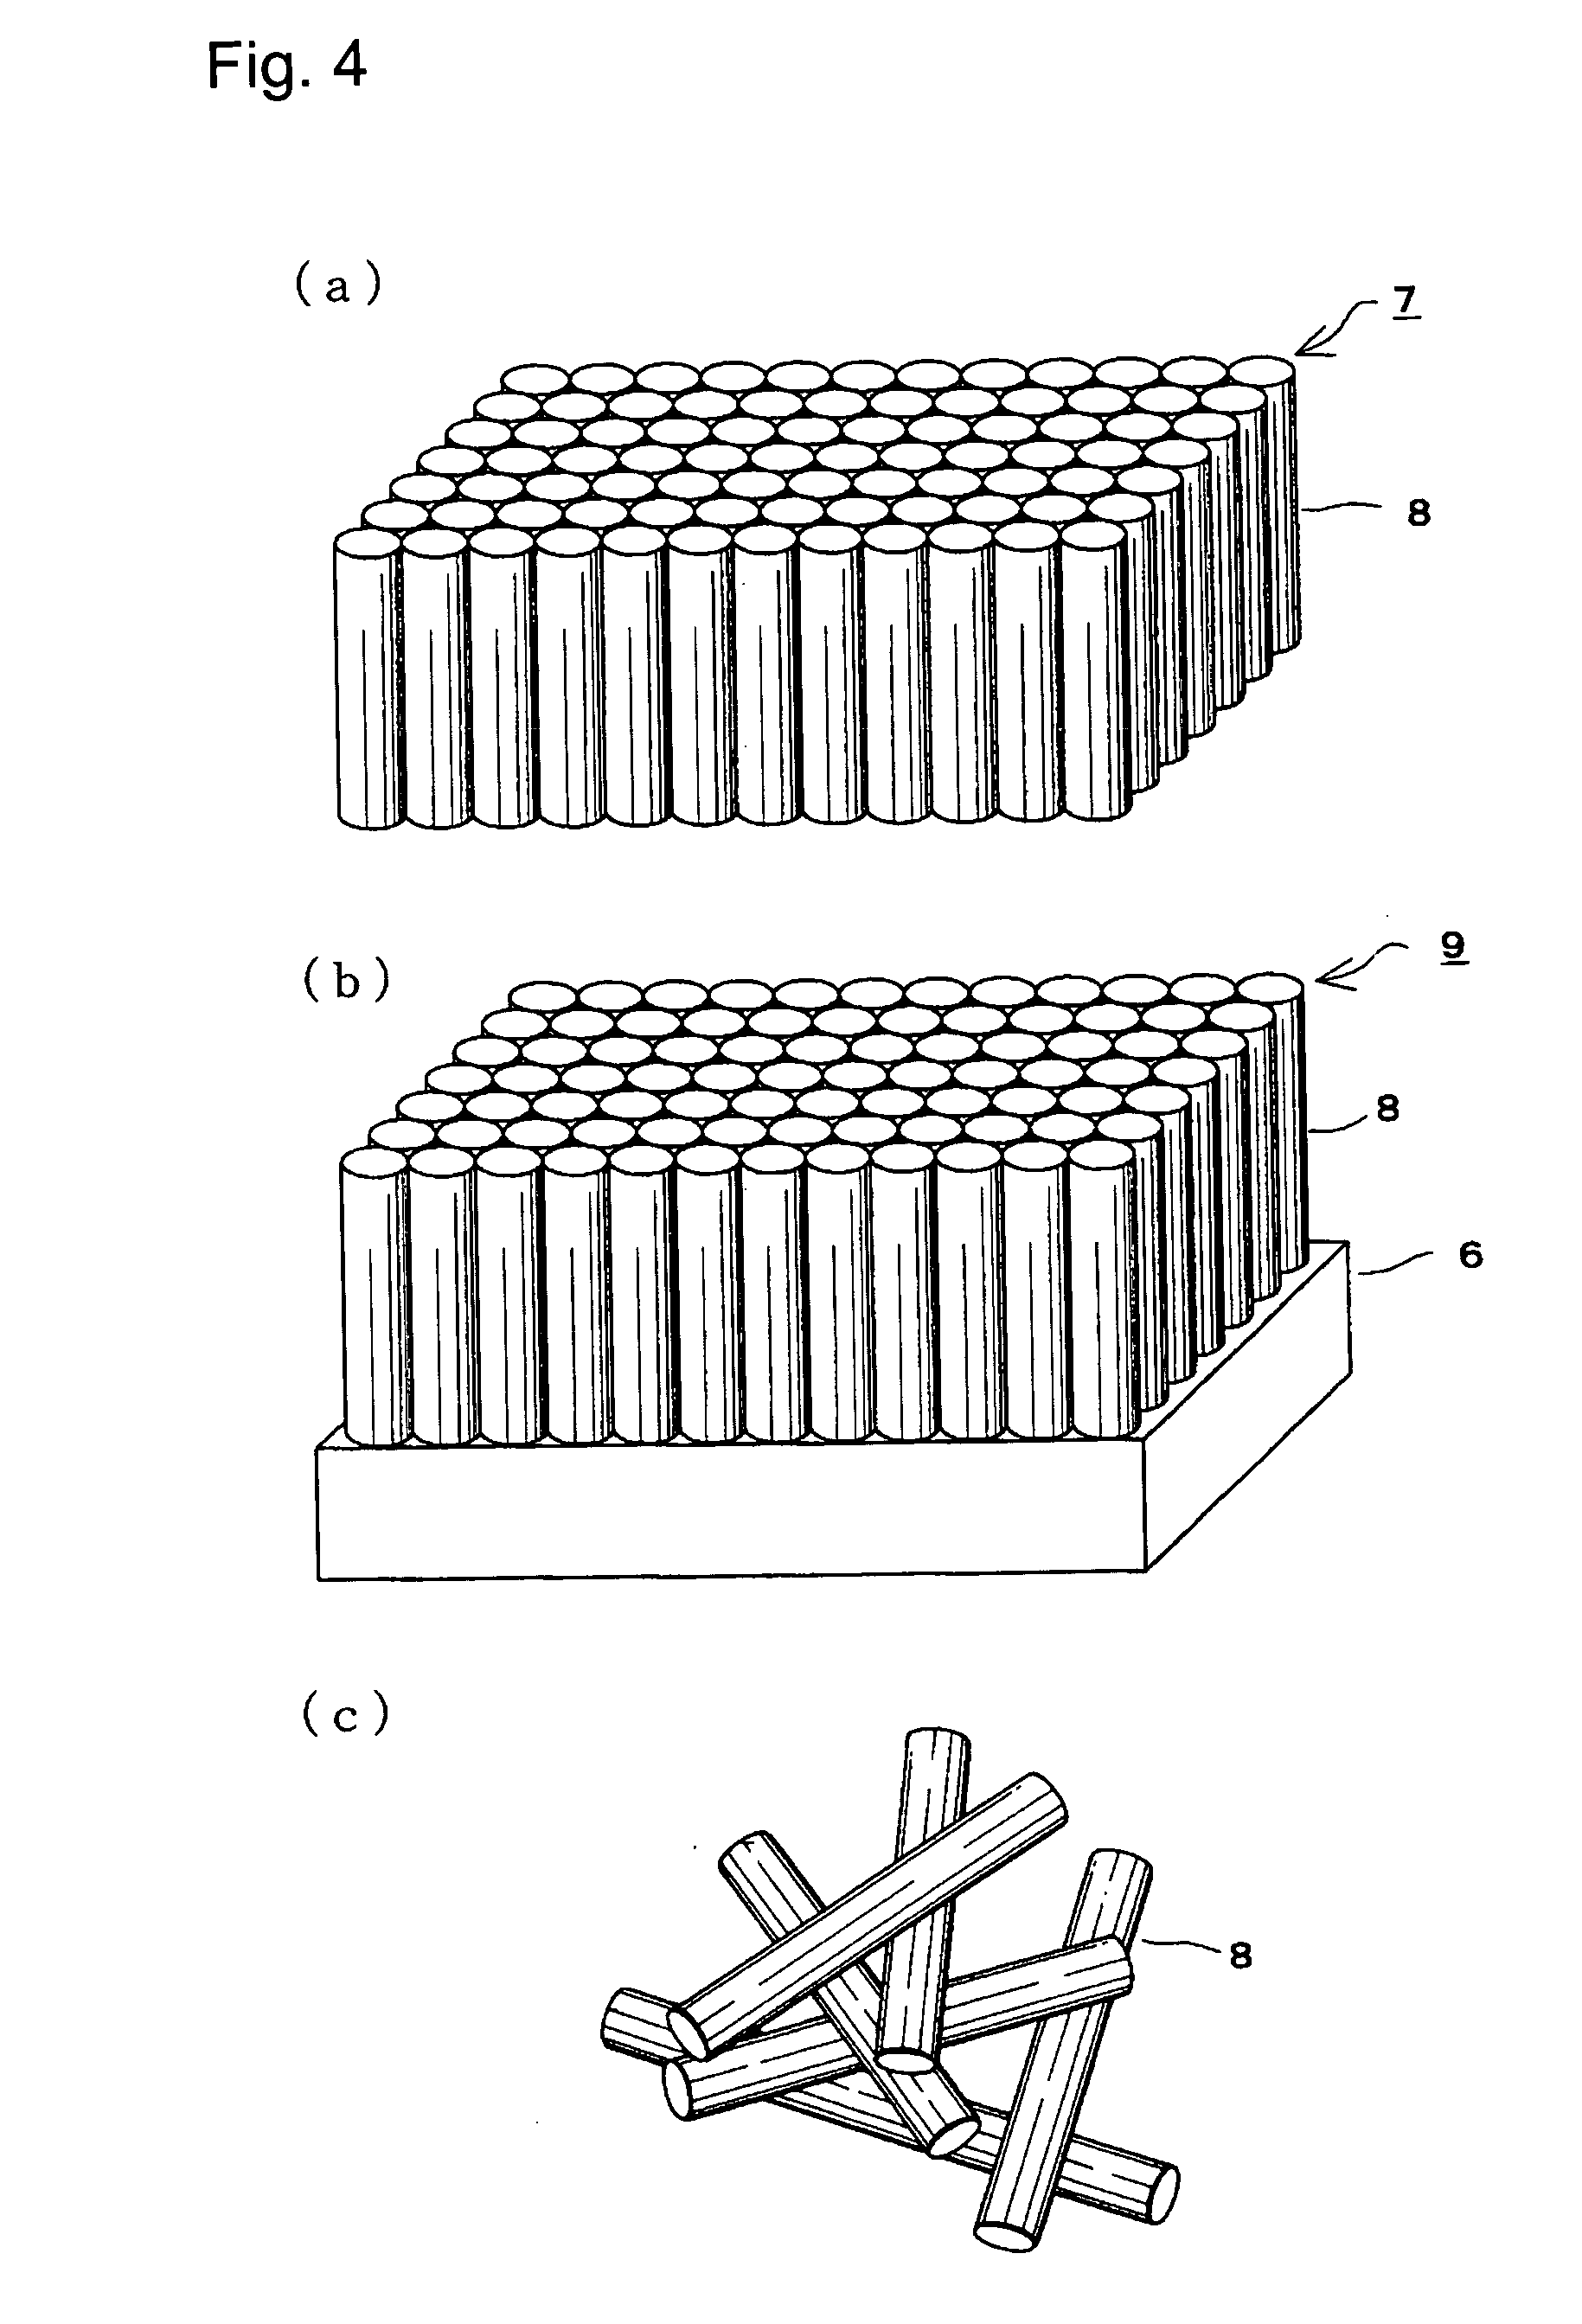 Oxide nanostructure, method for producing same, and use thereof